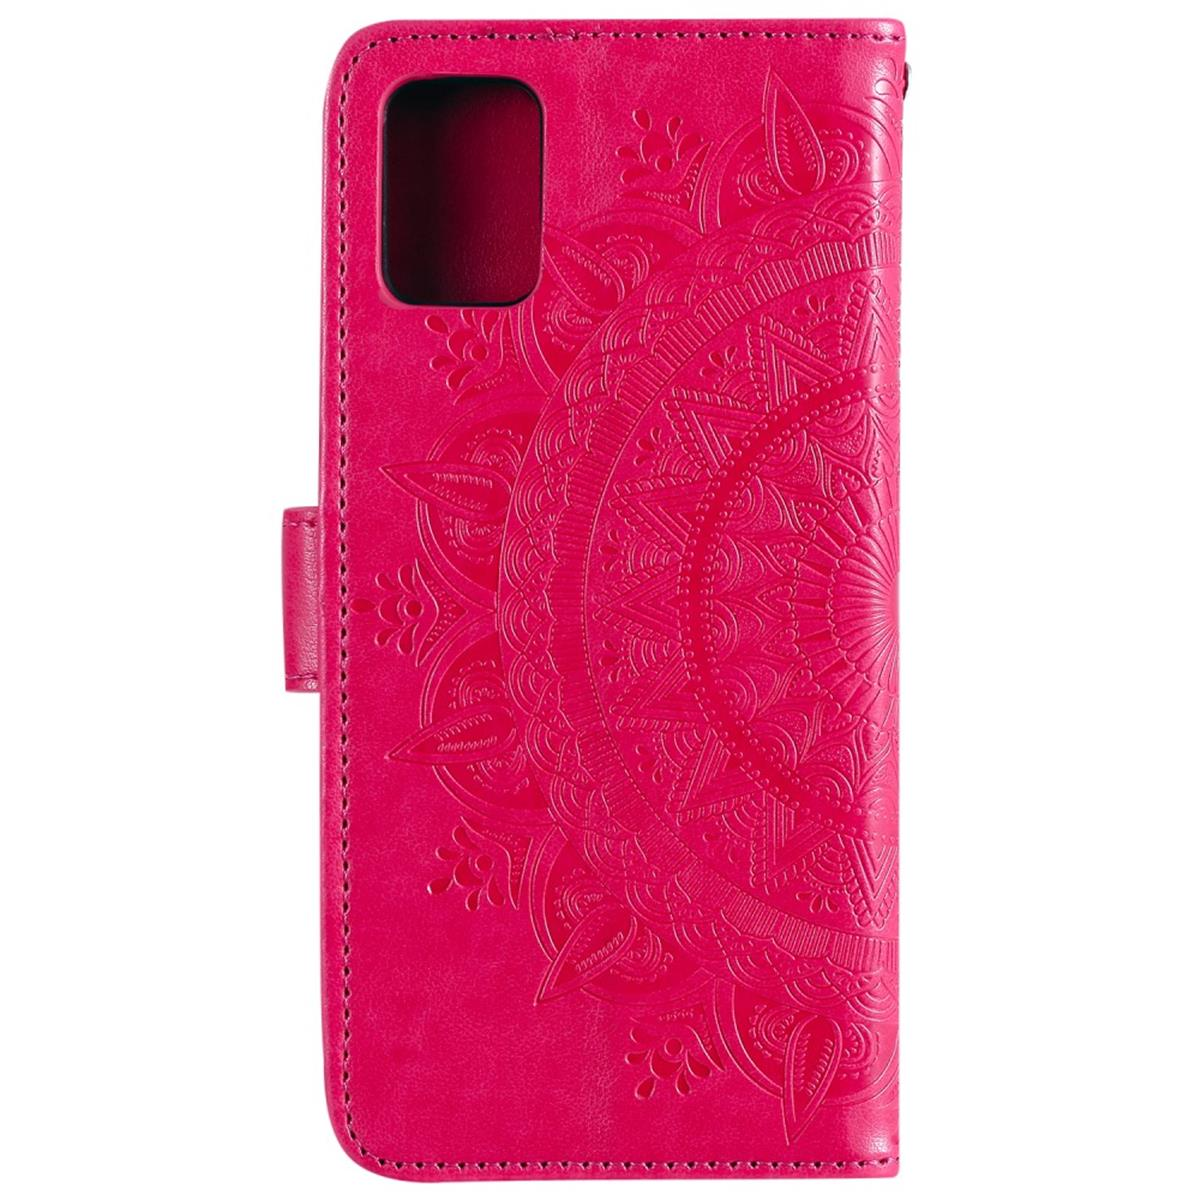 COVERKINGZ Mandala Muster, Note20, Klapphülle Pink mit Samsung, Galaxy Bookcover,